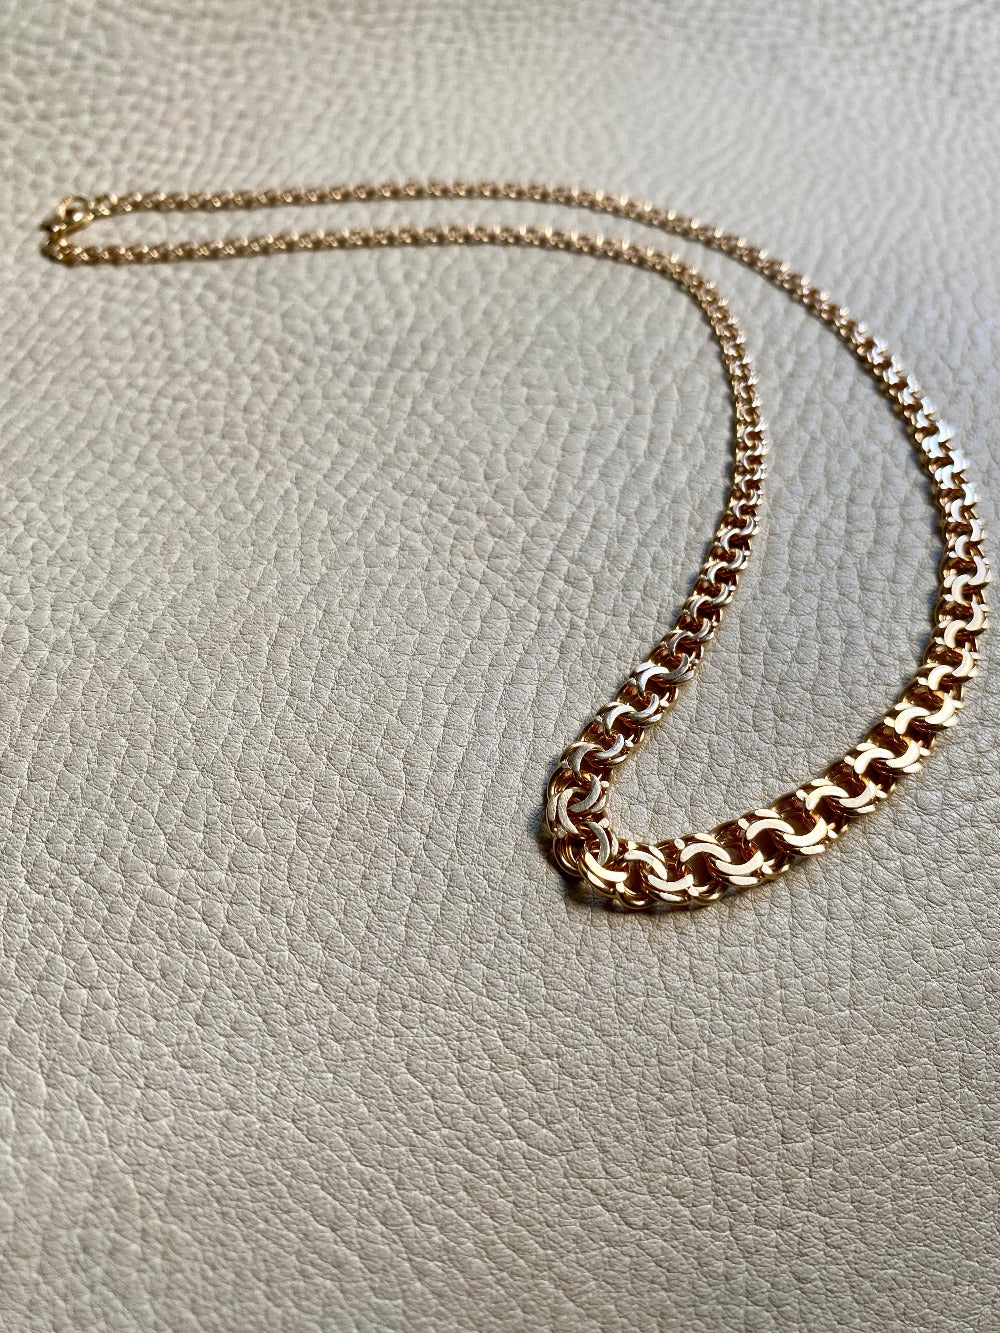 1977 Swedish 18k Gold necklace - Graduated double link chain - 17 inch length